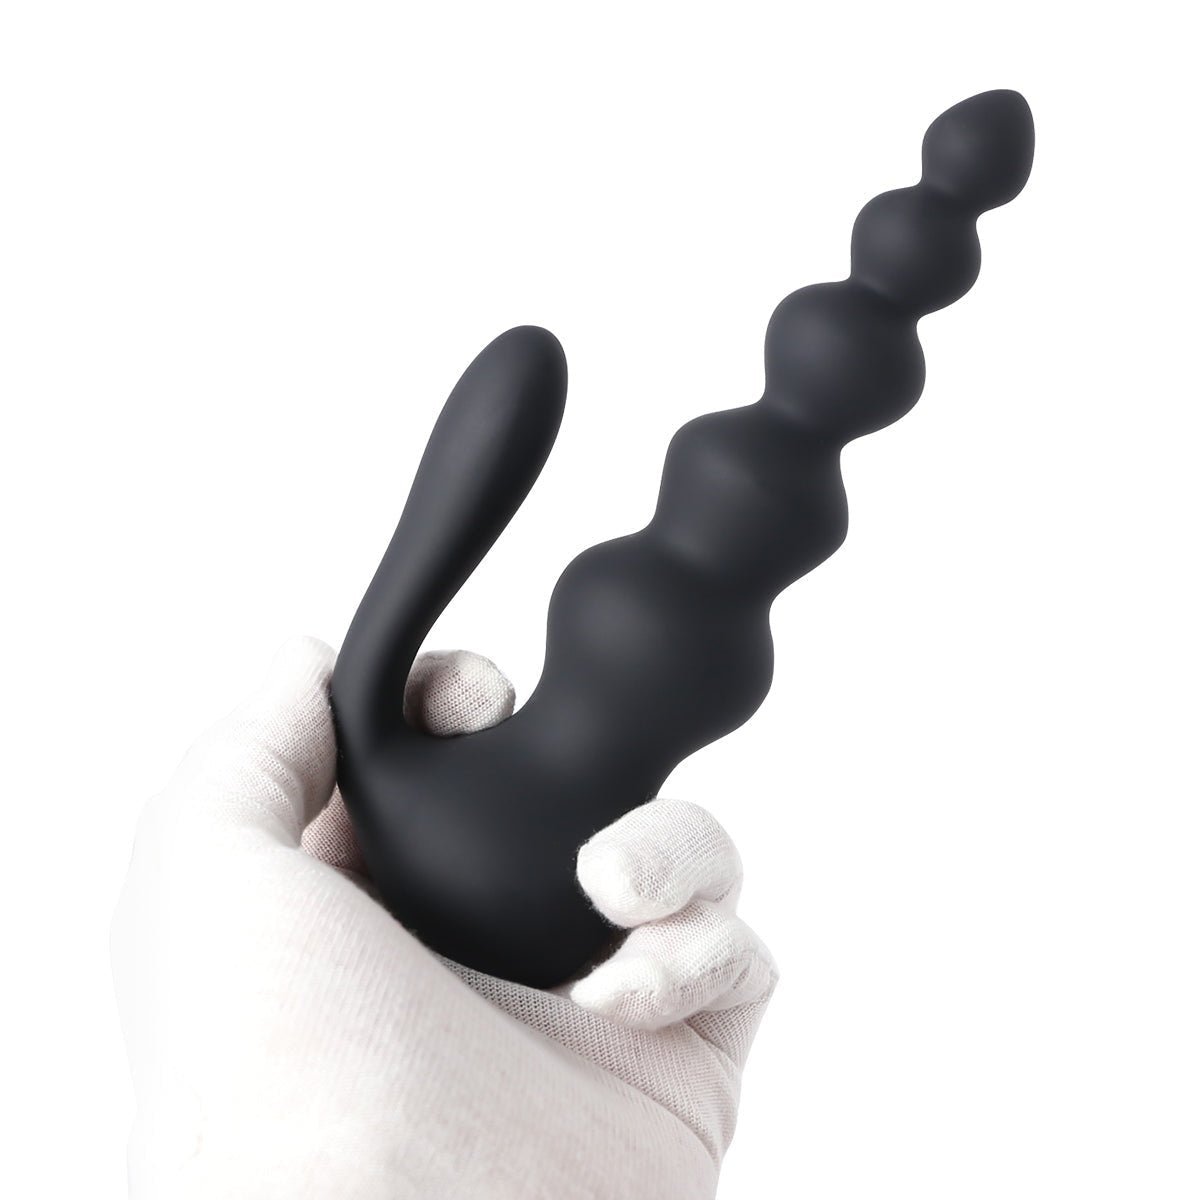 Control Your Pleasure with Remote Vibrating Butt Plug!